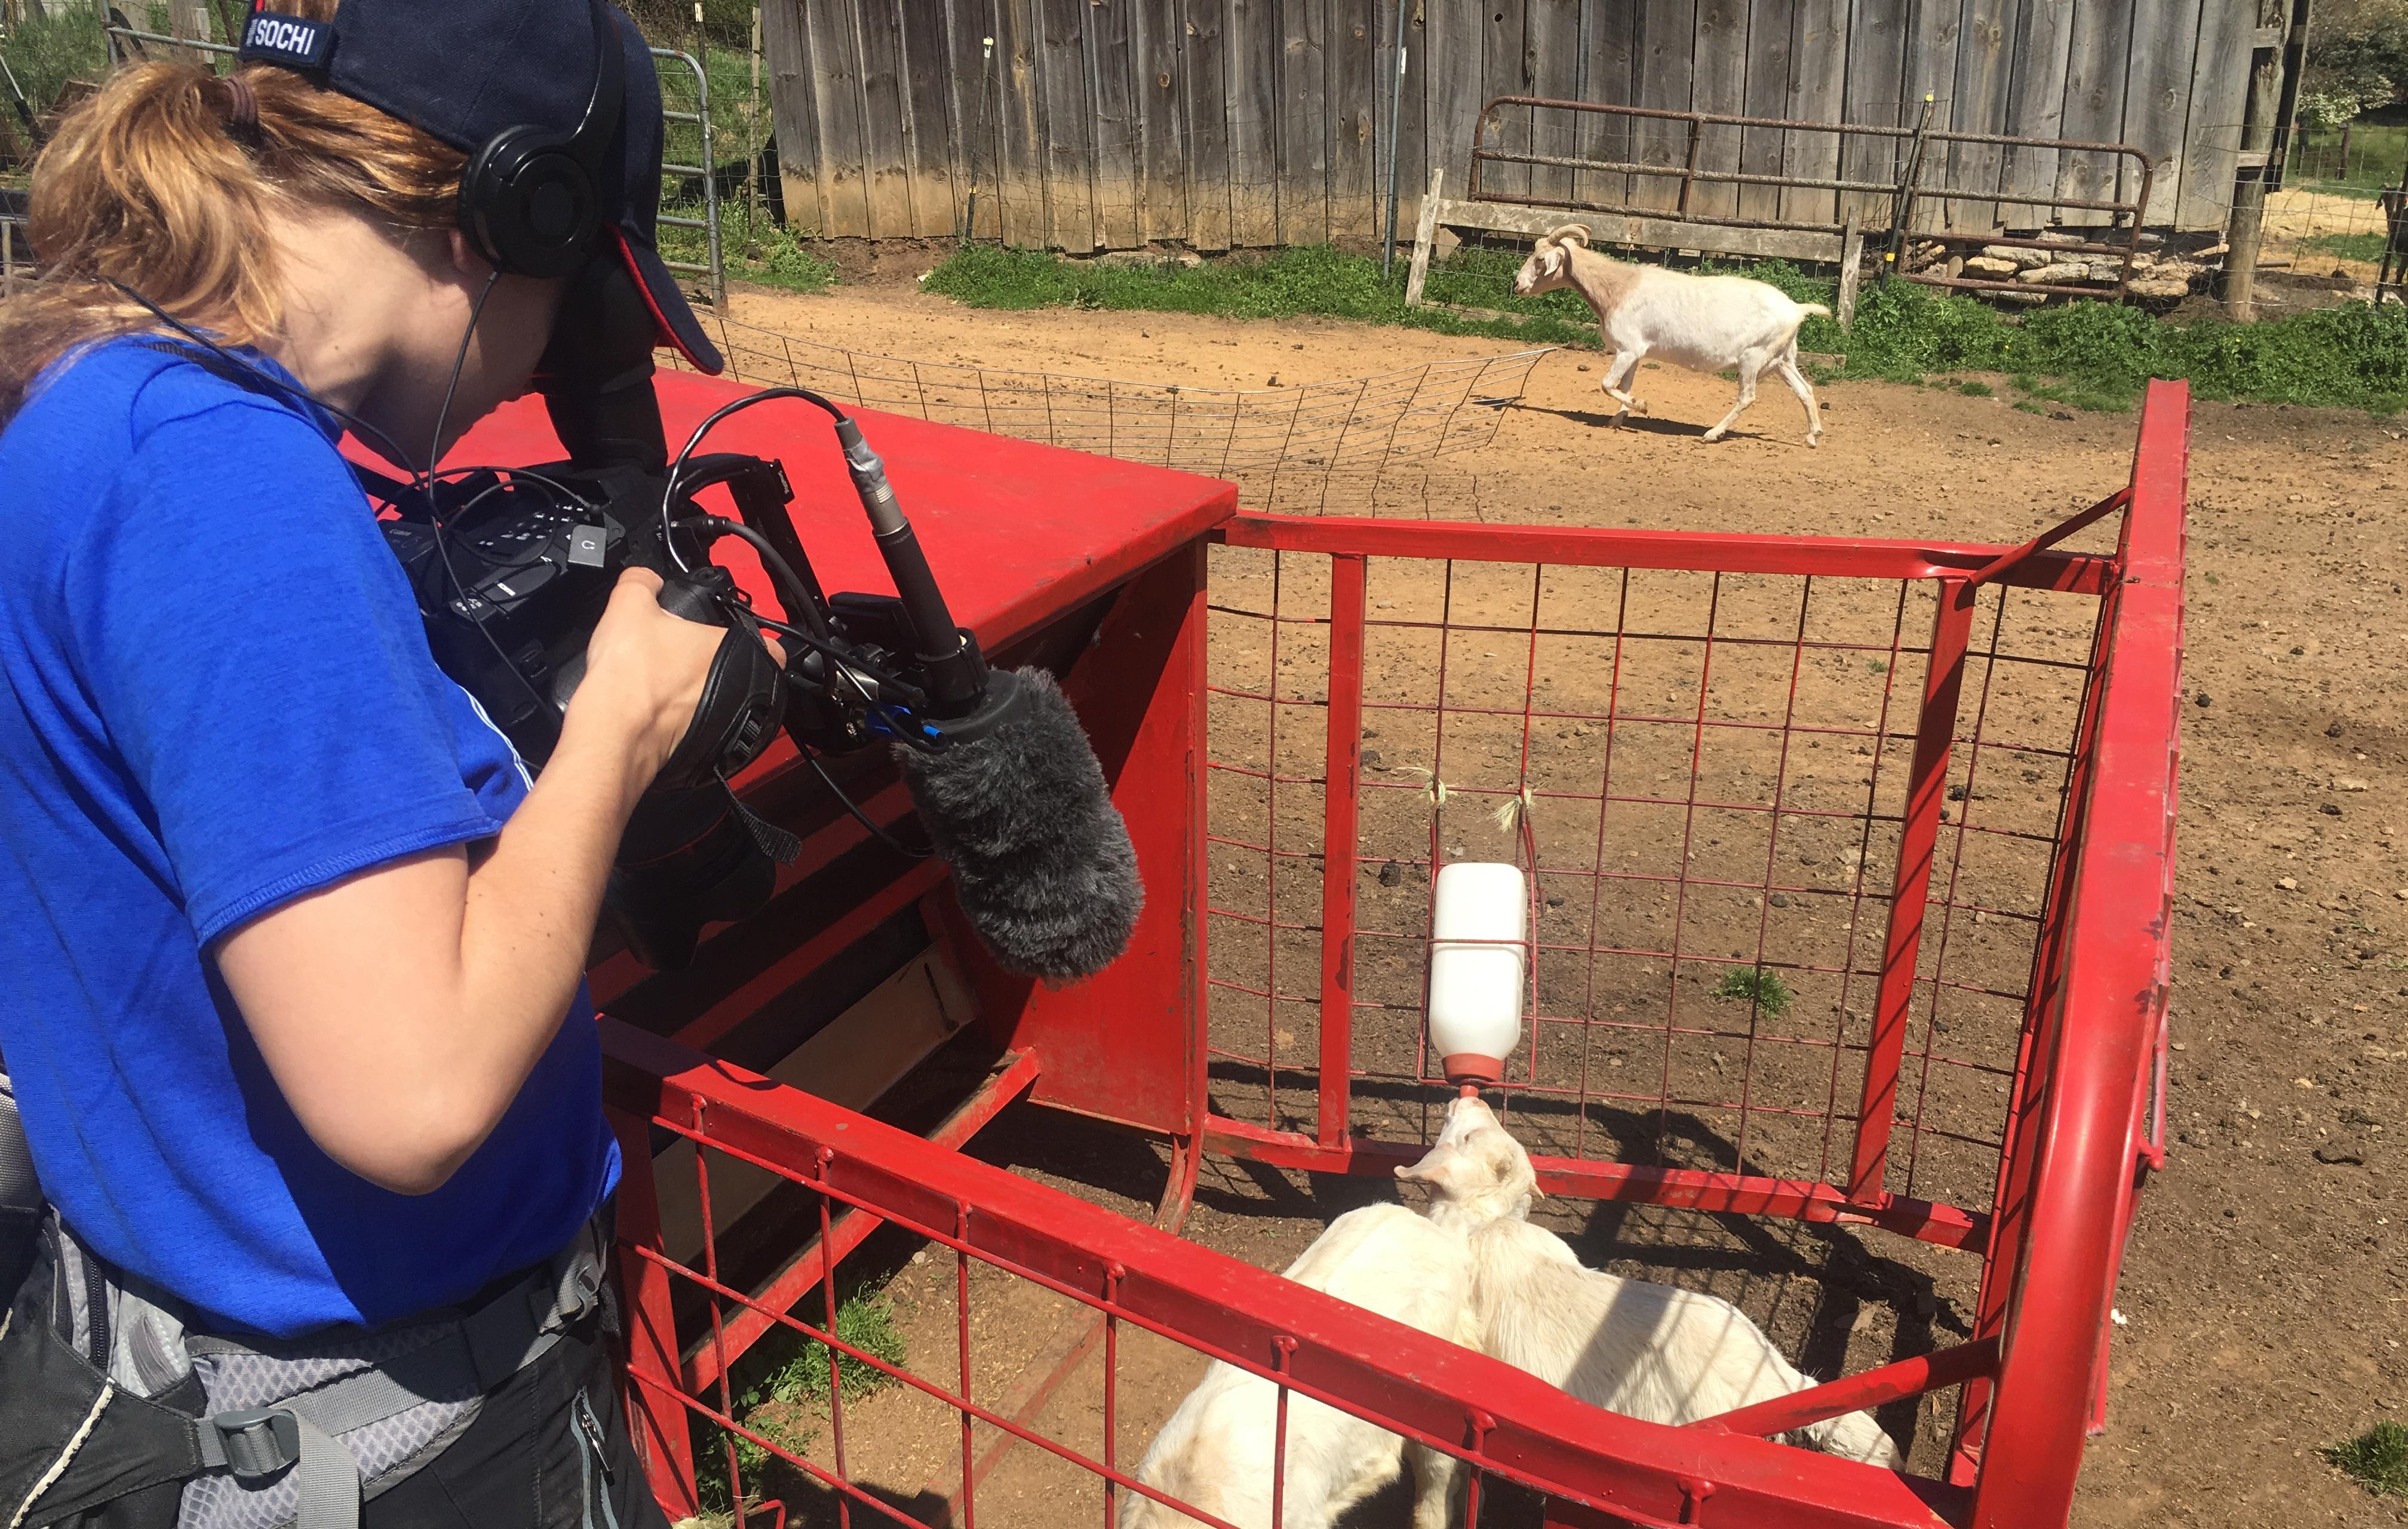 blonde crew member points camera down into red crate as baby goats drink out of a bottle